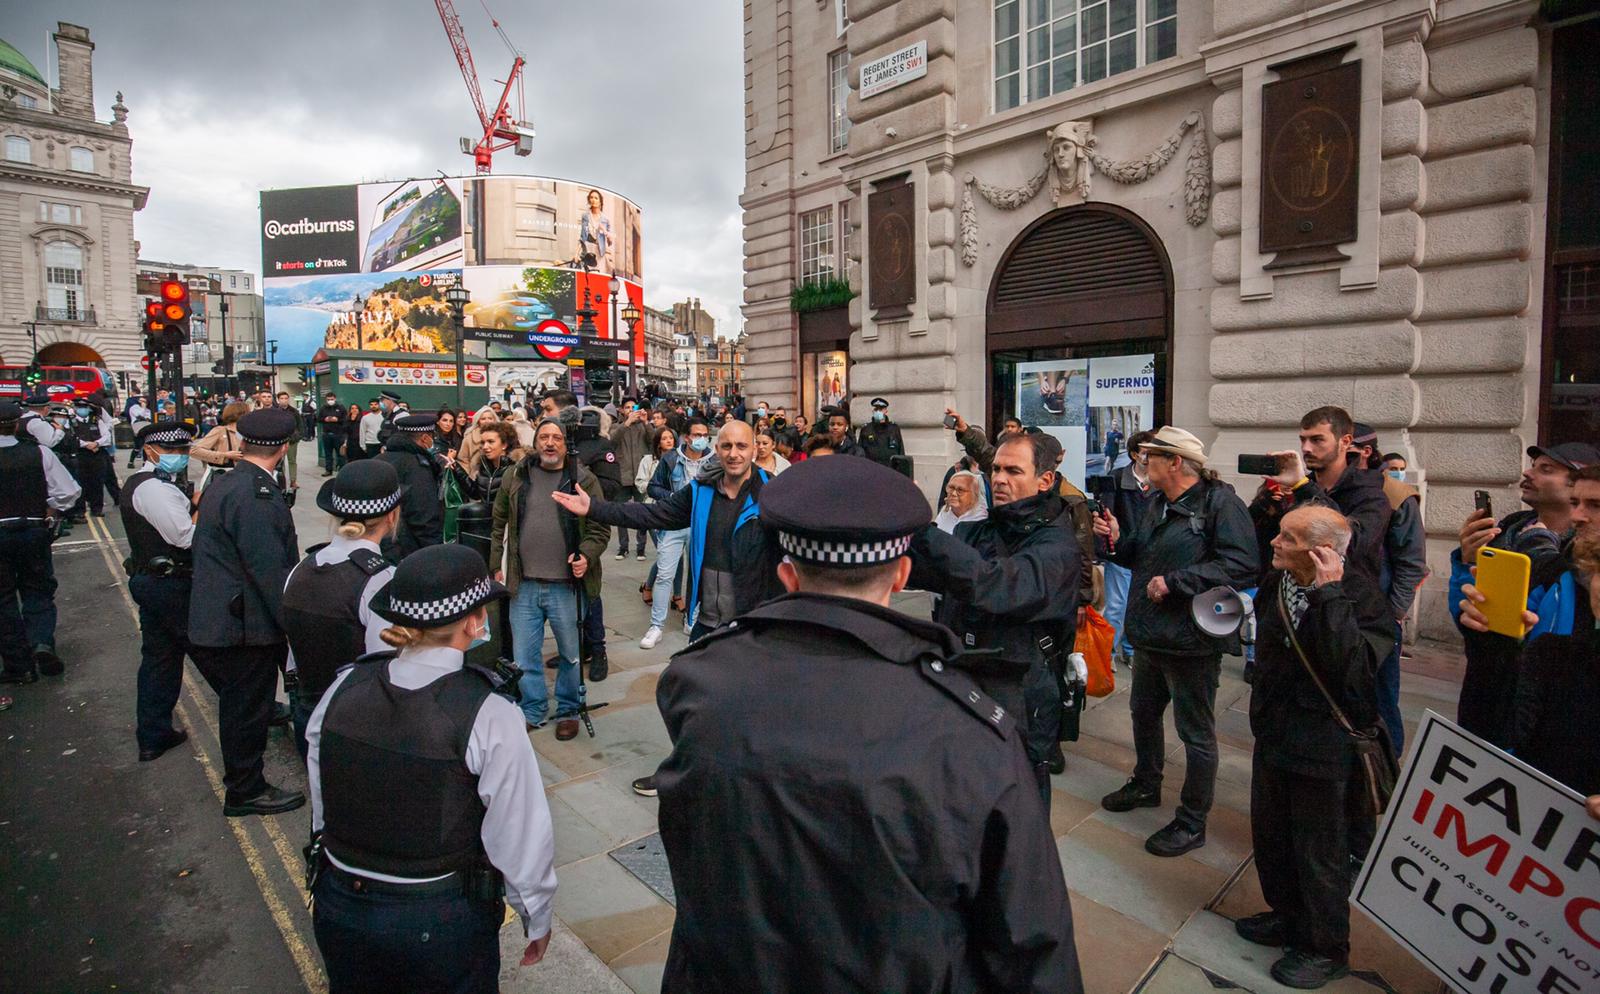 protest_photos:intimidation-failing-piccadilly-circus-london-3oct20.jpg